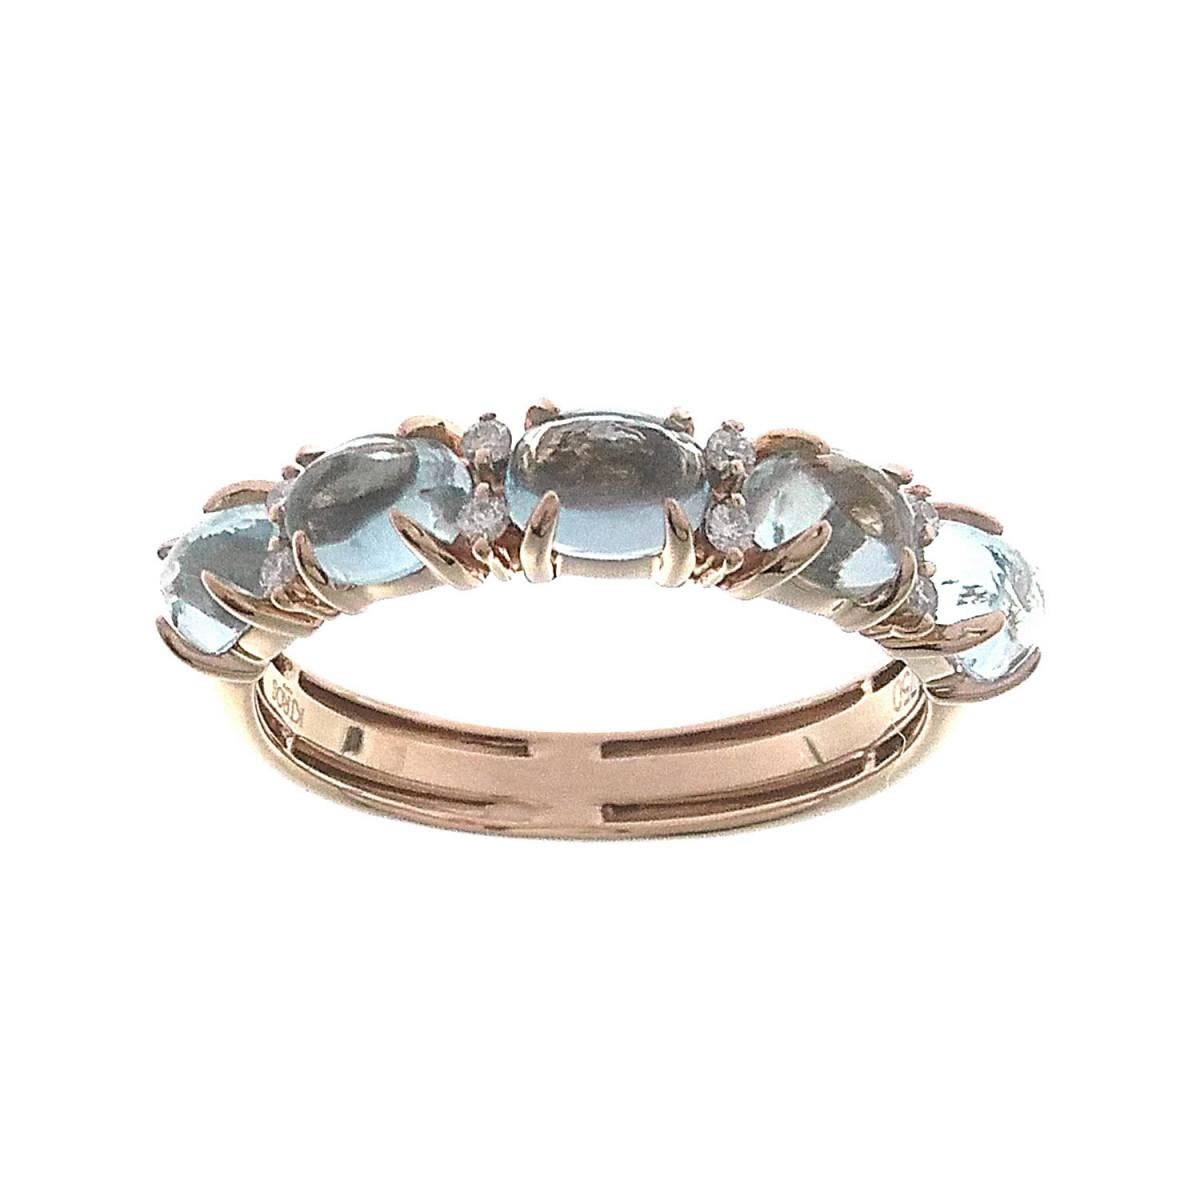 Beautiful Ring in 18K Rose Gold and Aquamarines

Rose Gold 18K
9 aquamarines 6.495 ct.
Weight 3.22gr.

ALSO AVAILABLE
Rose Gold 18Kt
8 Diamonds 0.06ct.
5 Aquamarines 2.82ct.
Weight 2.99gr.
€2400 / $2450 approx.

ALSO AVAILABLE
Rose Gold 18Kt.
16